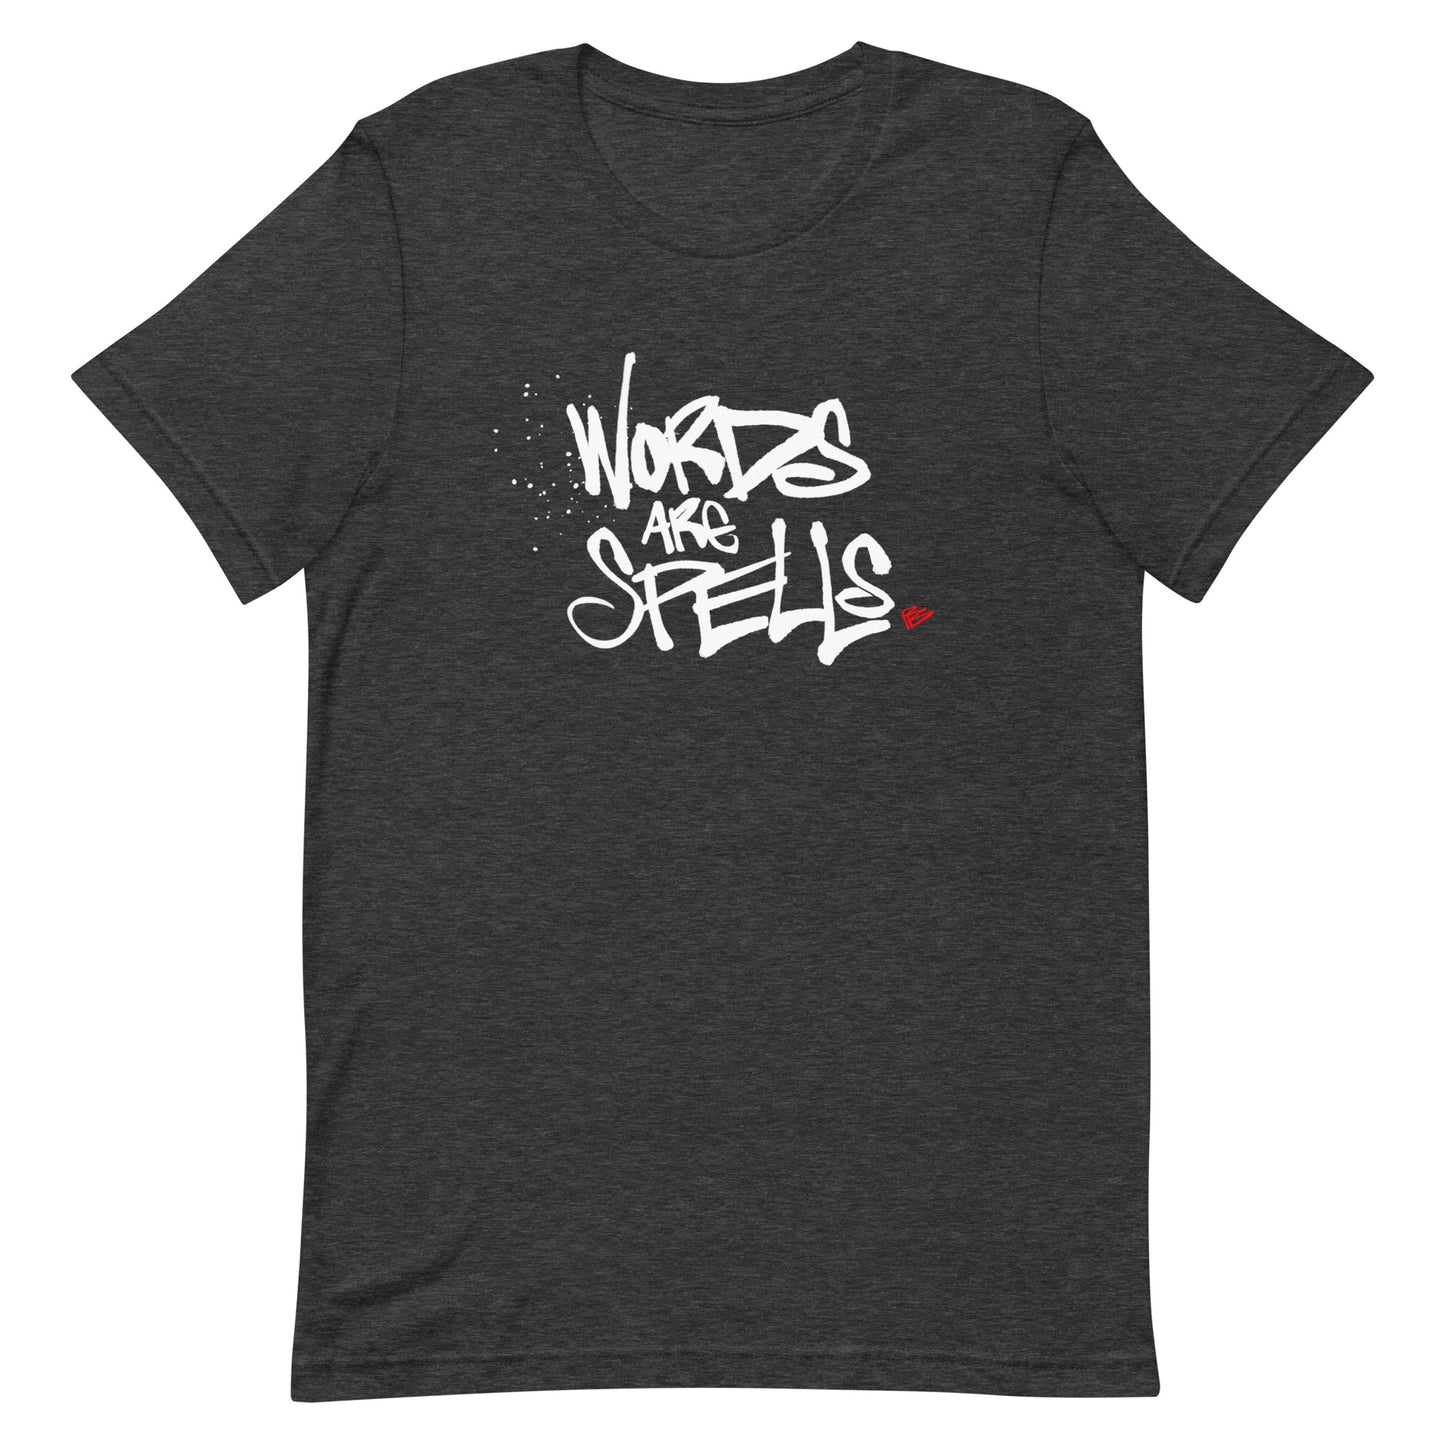 Words Are Spells - t-shirt